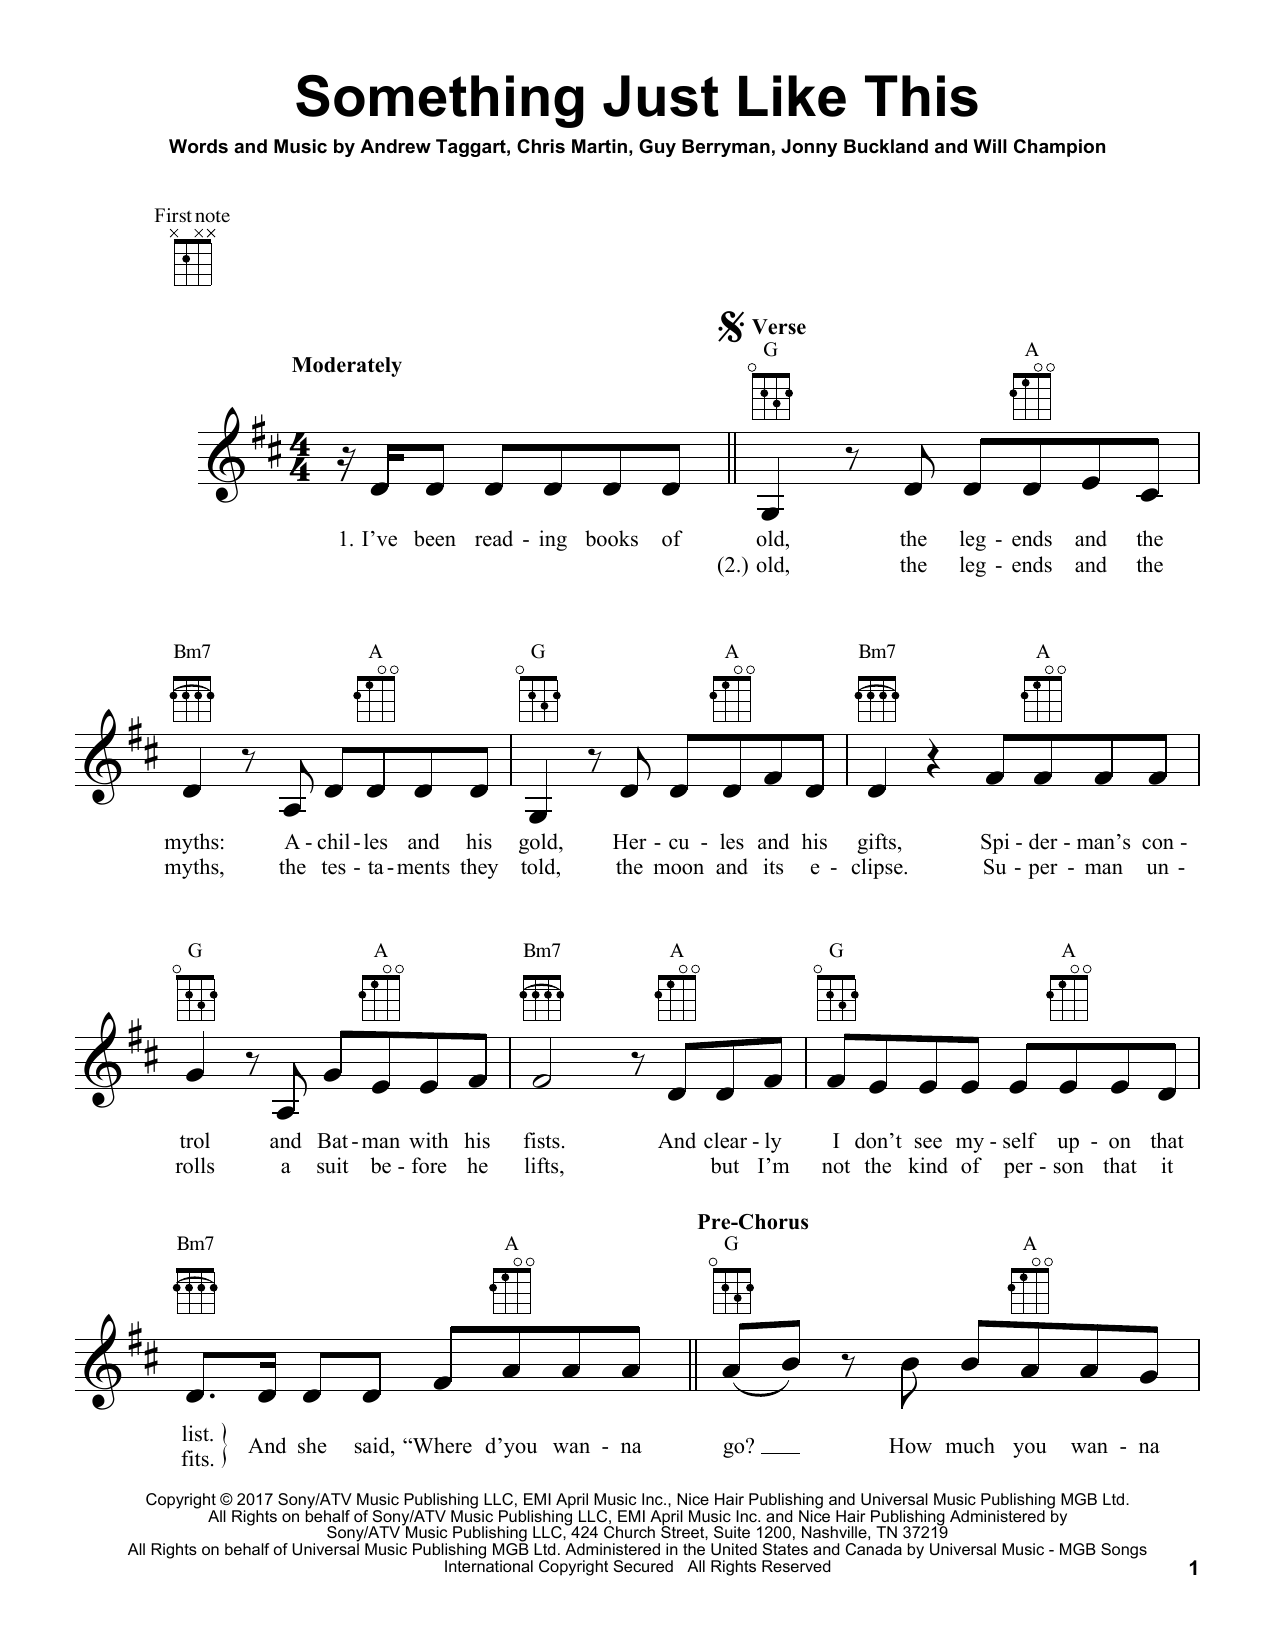 Download The Chainsmokers & Coldplay Something Just Like This Sheet Music